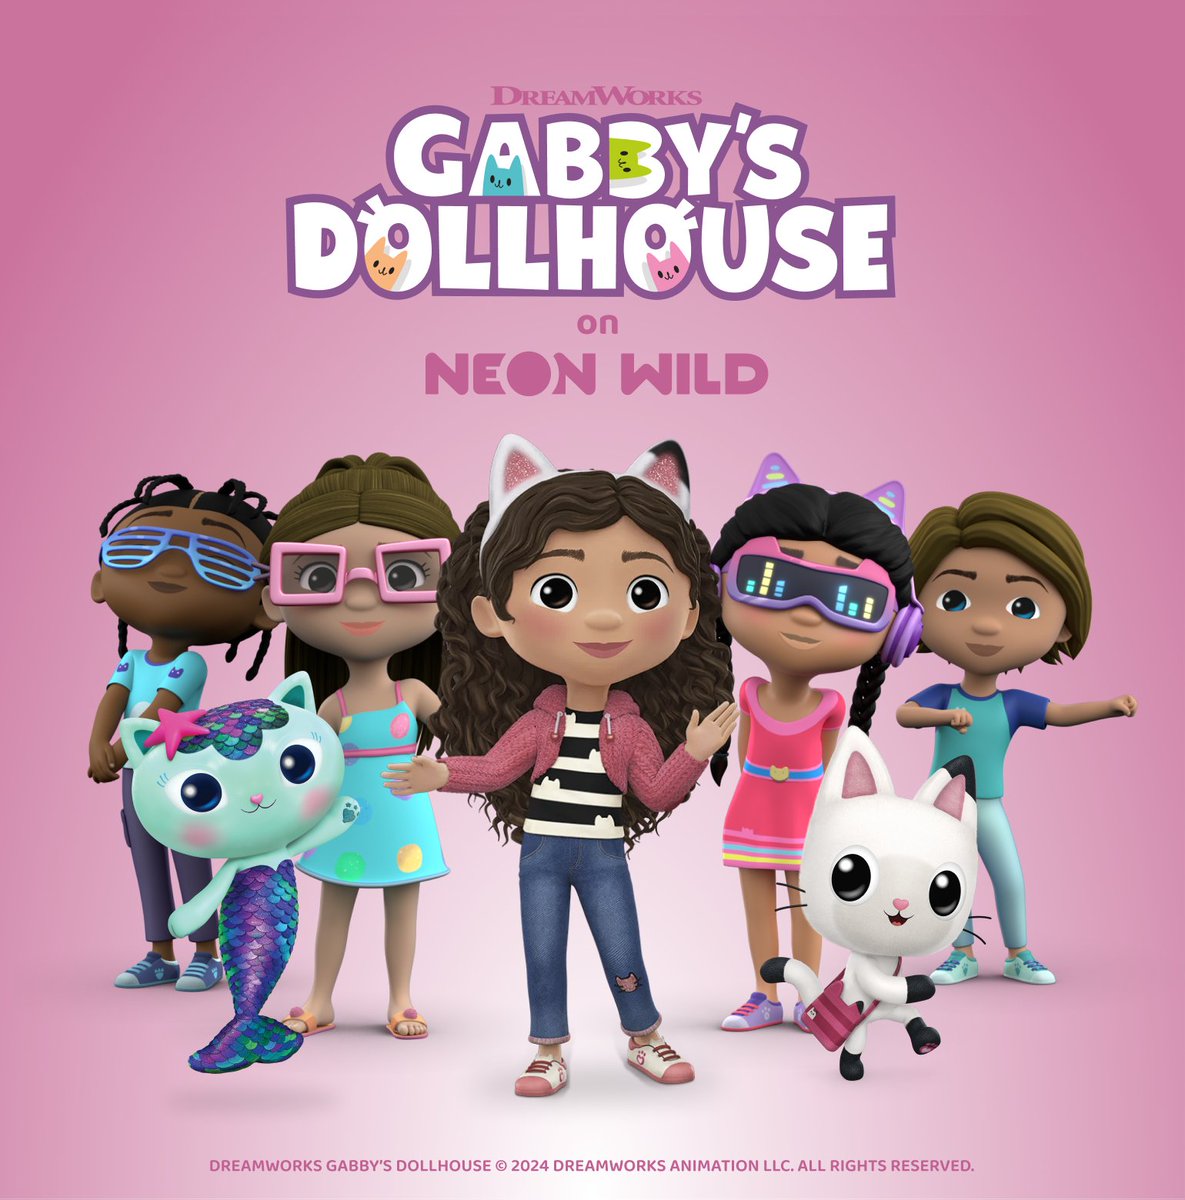 Gabby’s Dollhouse now available on @neon__wild!😻 An all new #GabbysDollhouse adventure is now available on the #NeonWild app. Kids can create their own avatar and join Gabby and the Gabby Cats as they put on the first ever Cat-tastic Talent Show!